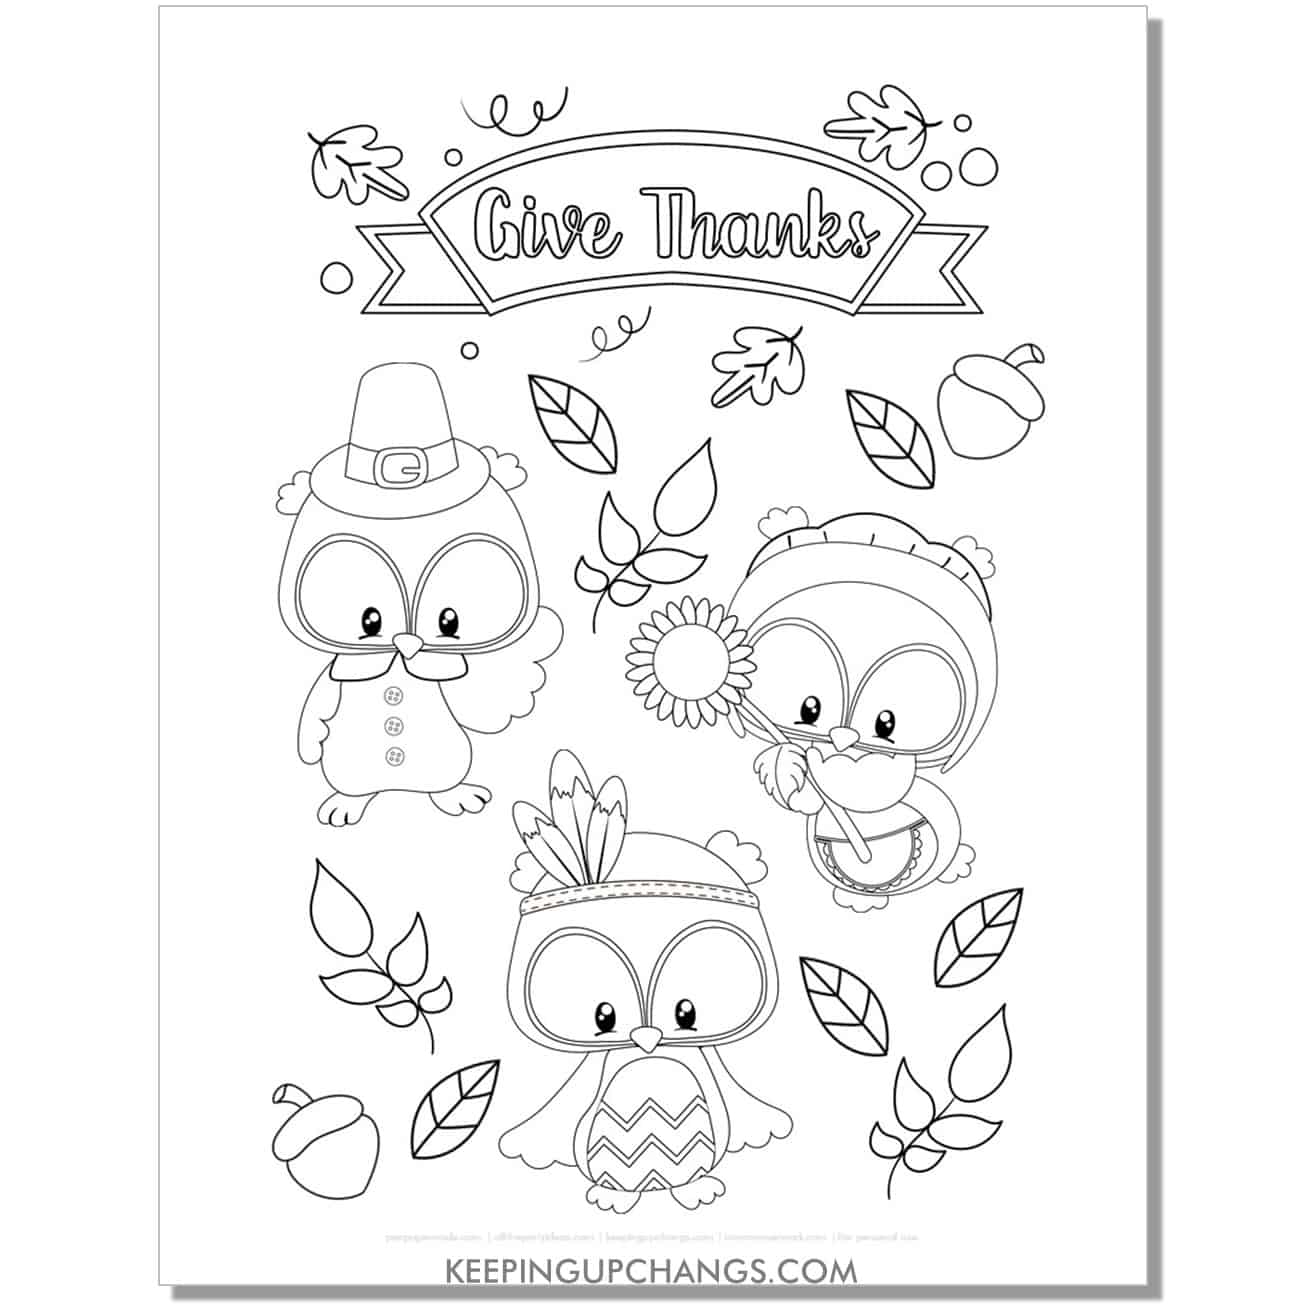 free give thanks pilgrim indian owl full size coloring page for fall, thanksgiving.